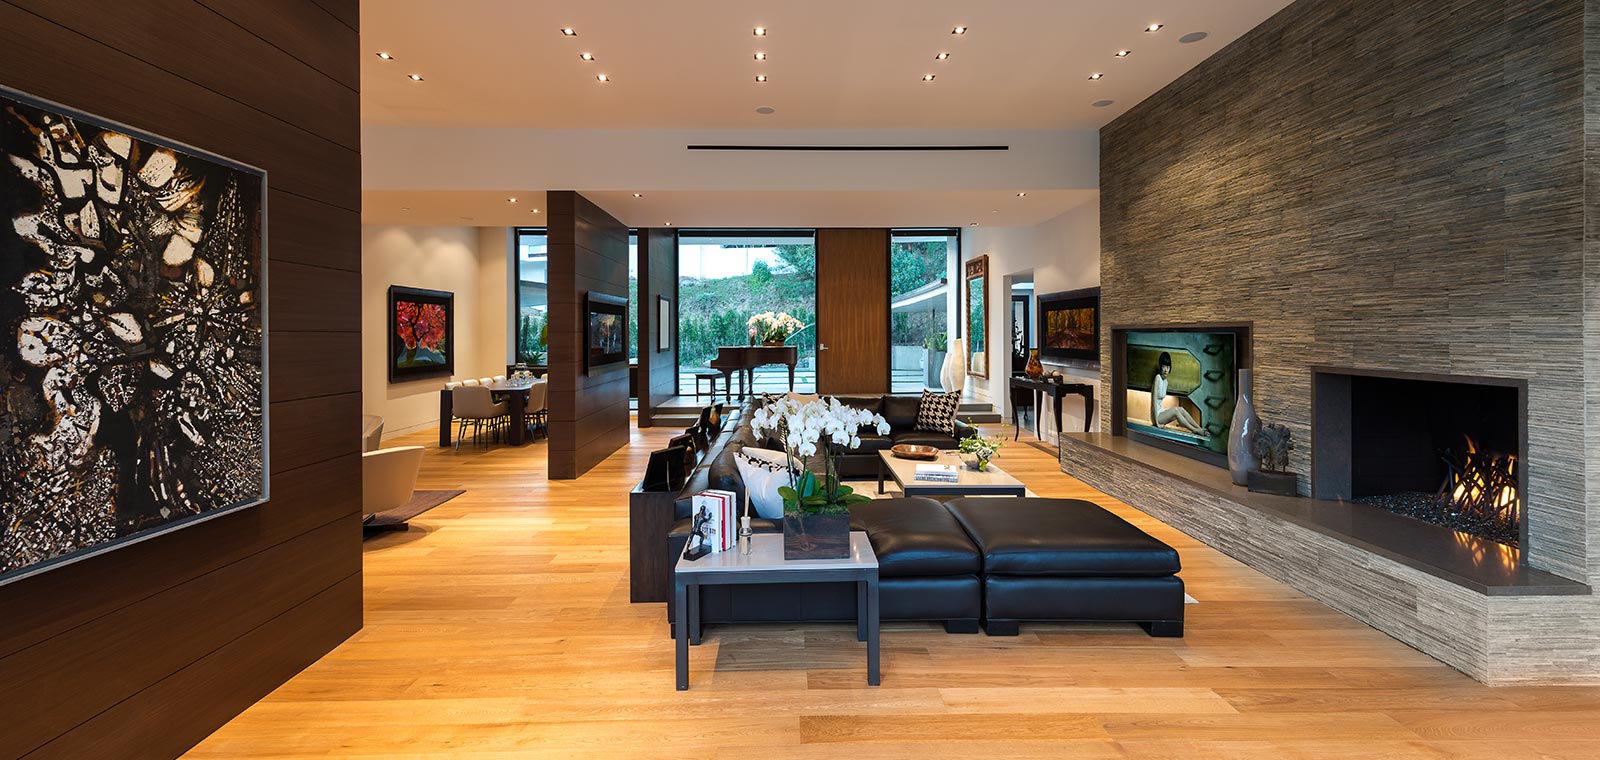 Wallace Ridge by Whipple Russell Architects - Stunning Living Room